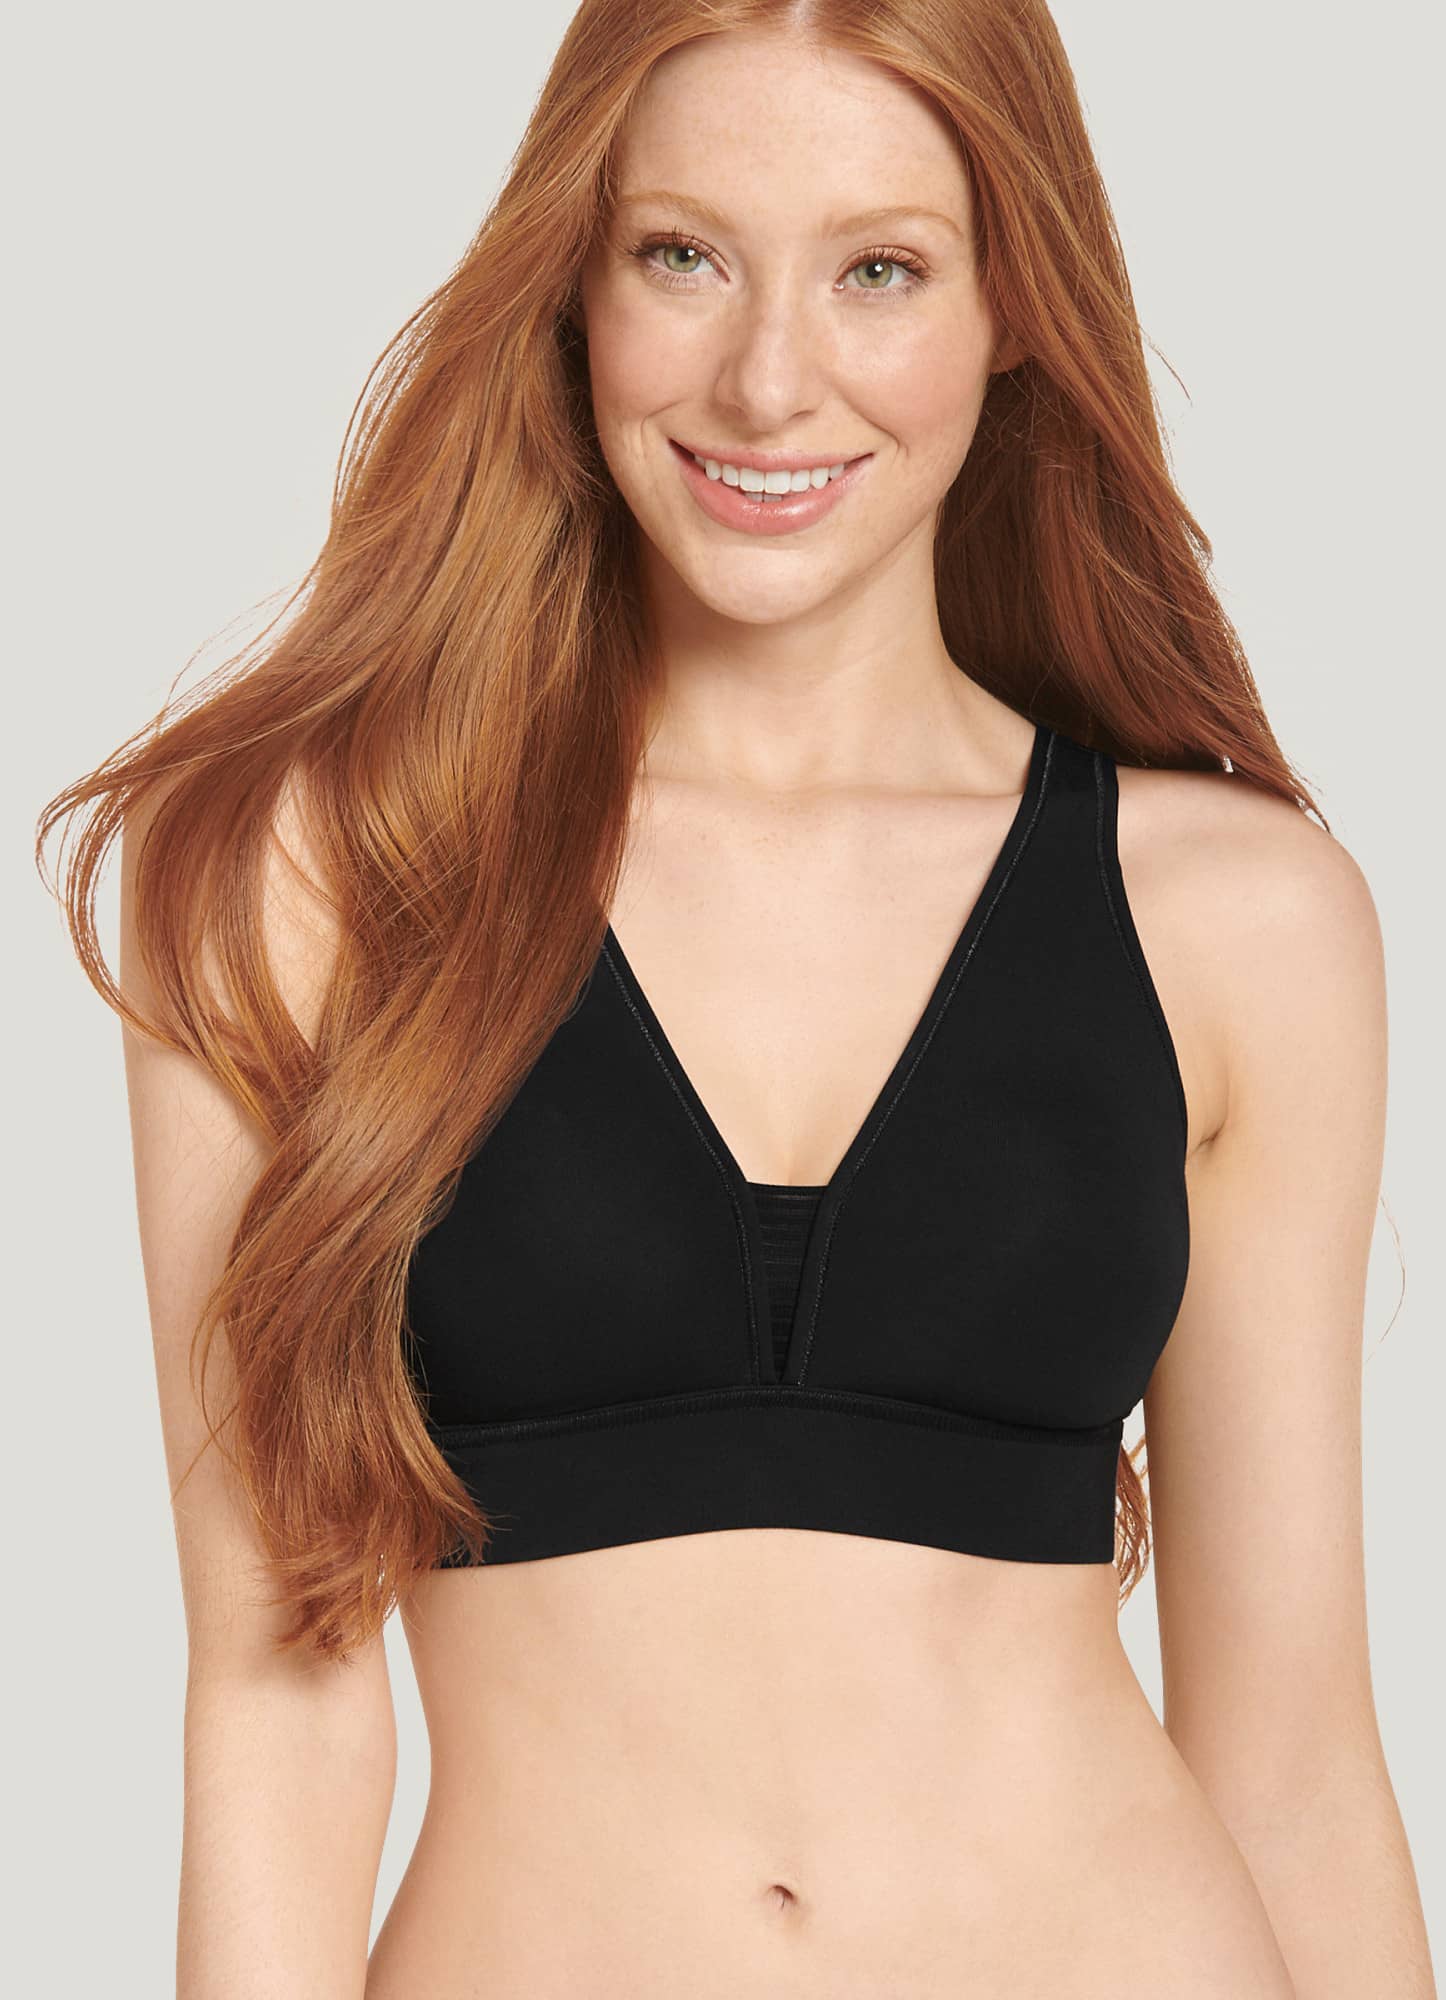 Jockey Women's Bra Forever Fit V-Neck Unlined Bra, Soft Rose, S :  : Clothing, Shoes & Accessories